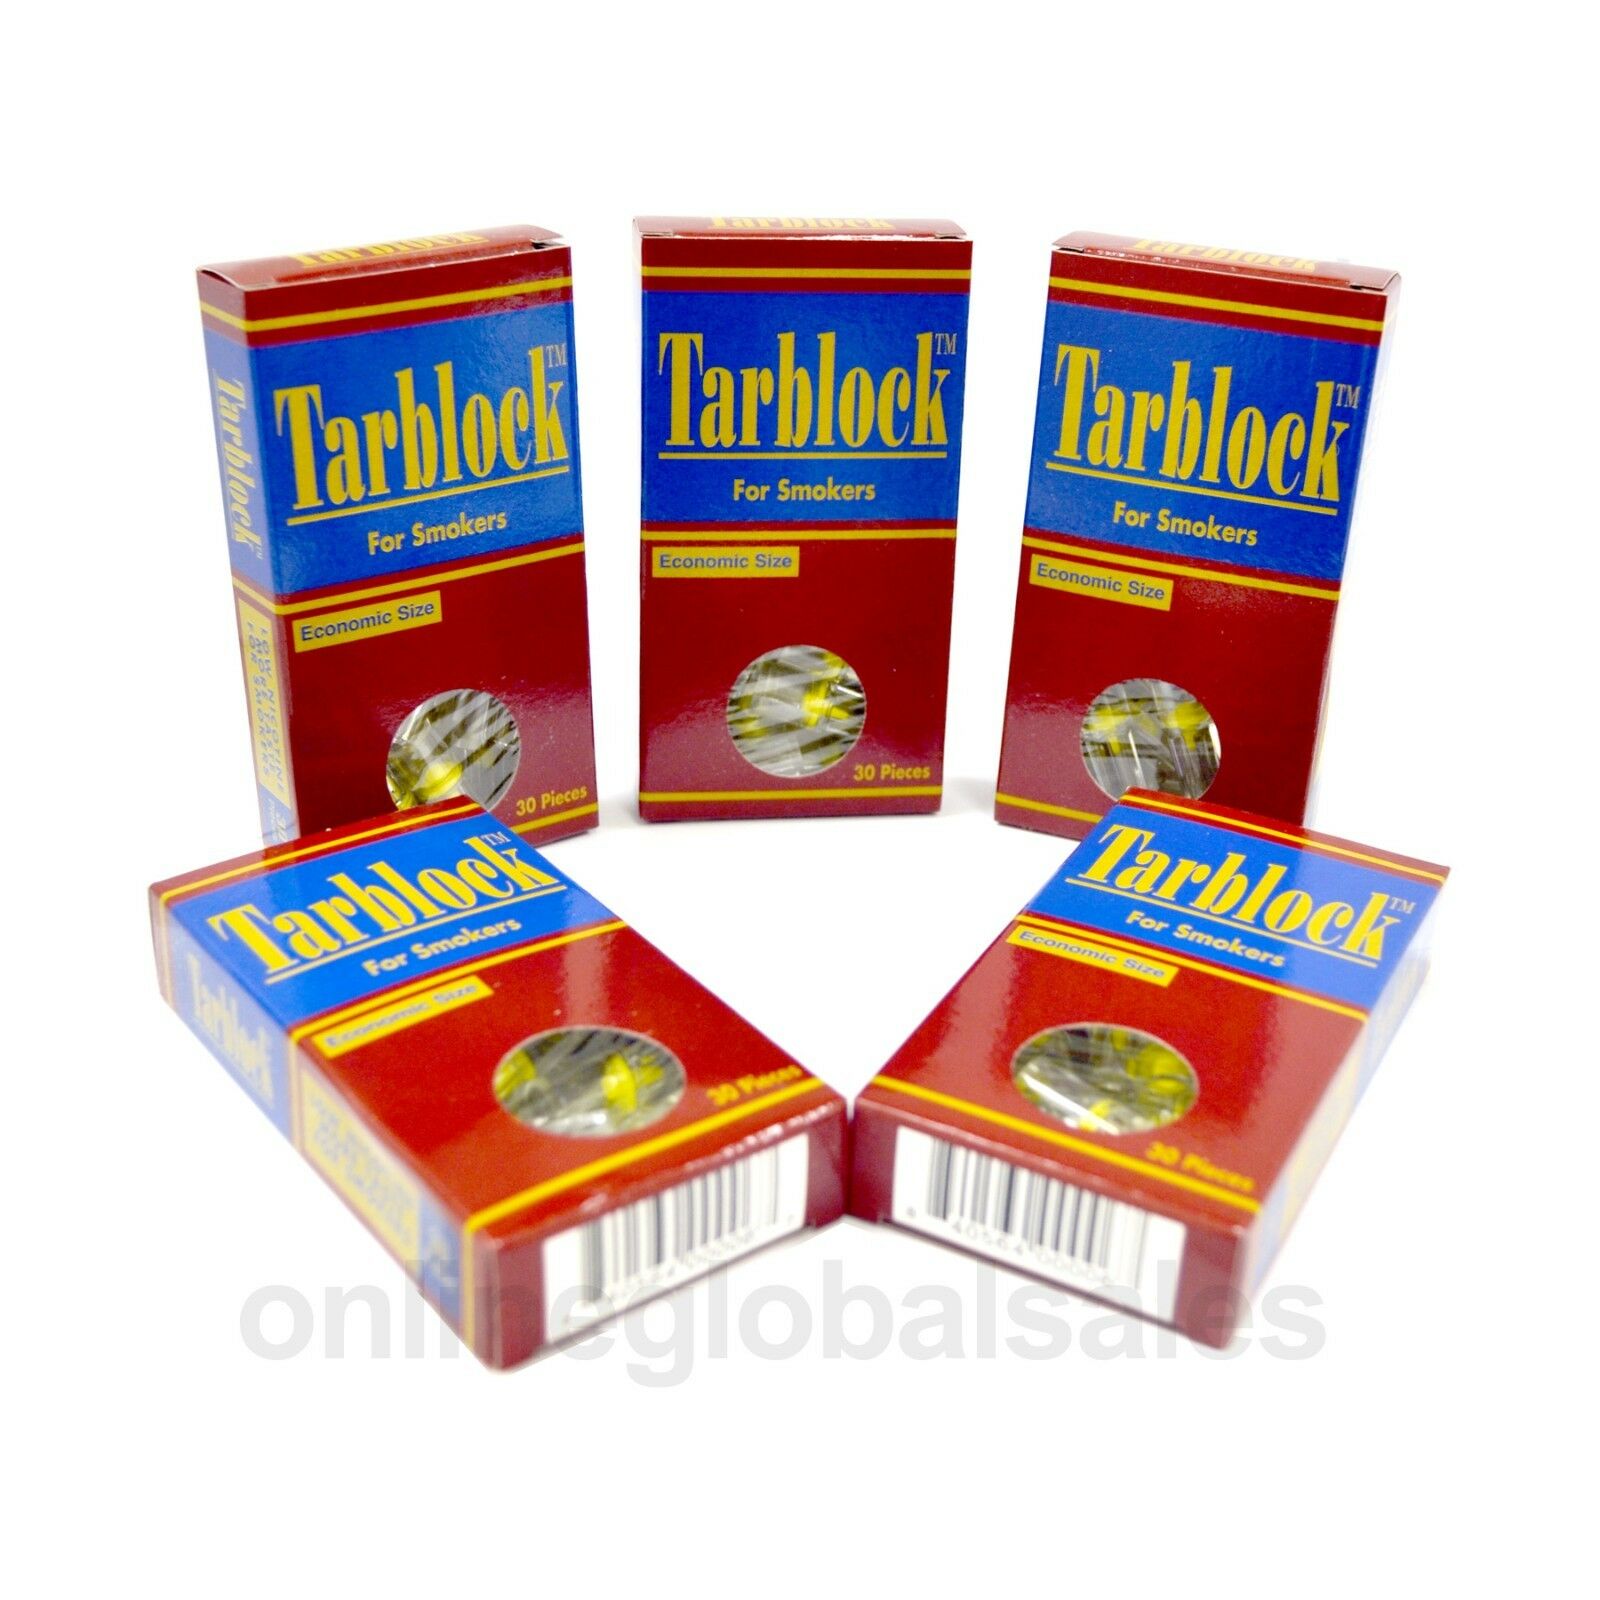 Tarblock Disposable Cigarette Filter Tips 5 Packs (150 Filters) ~free Shipping!